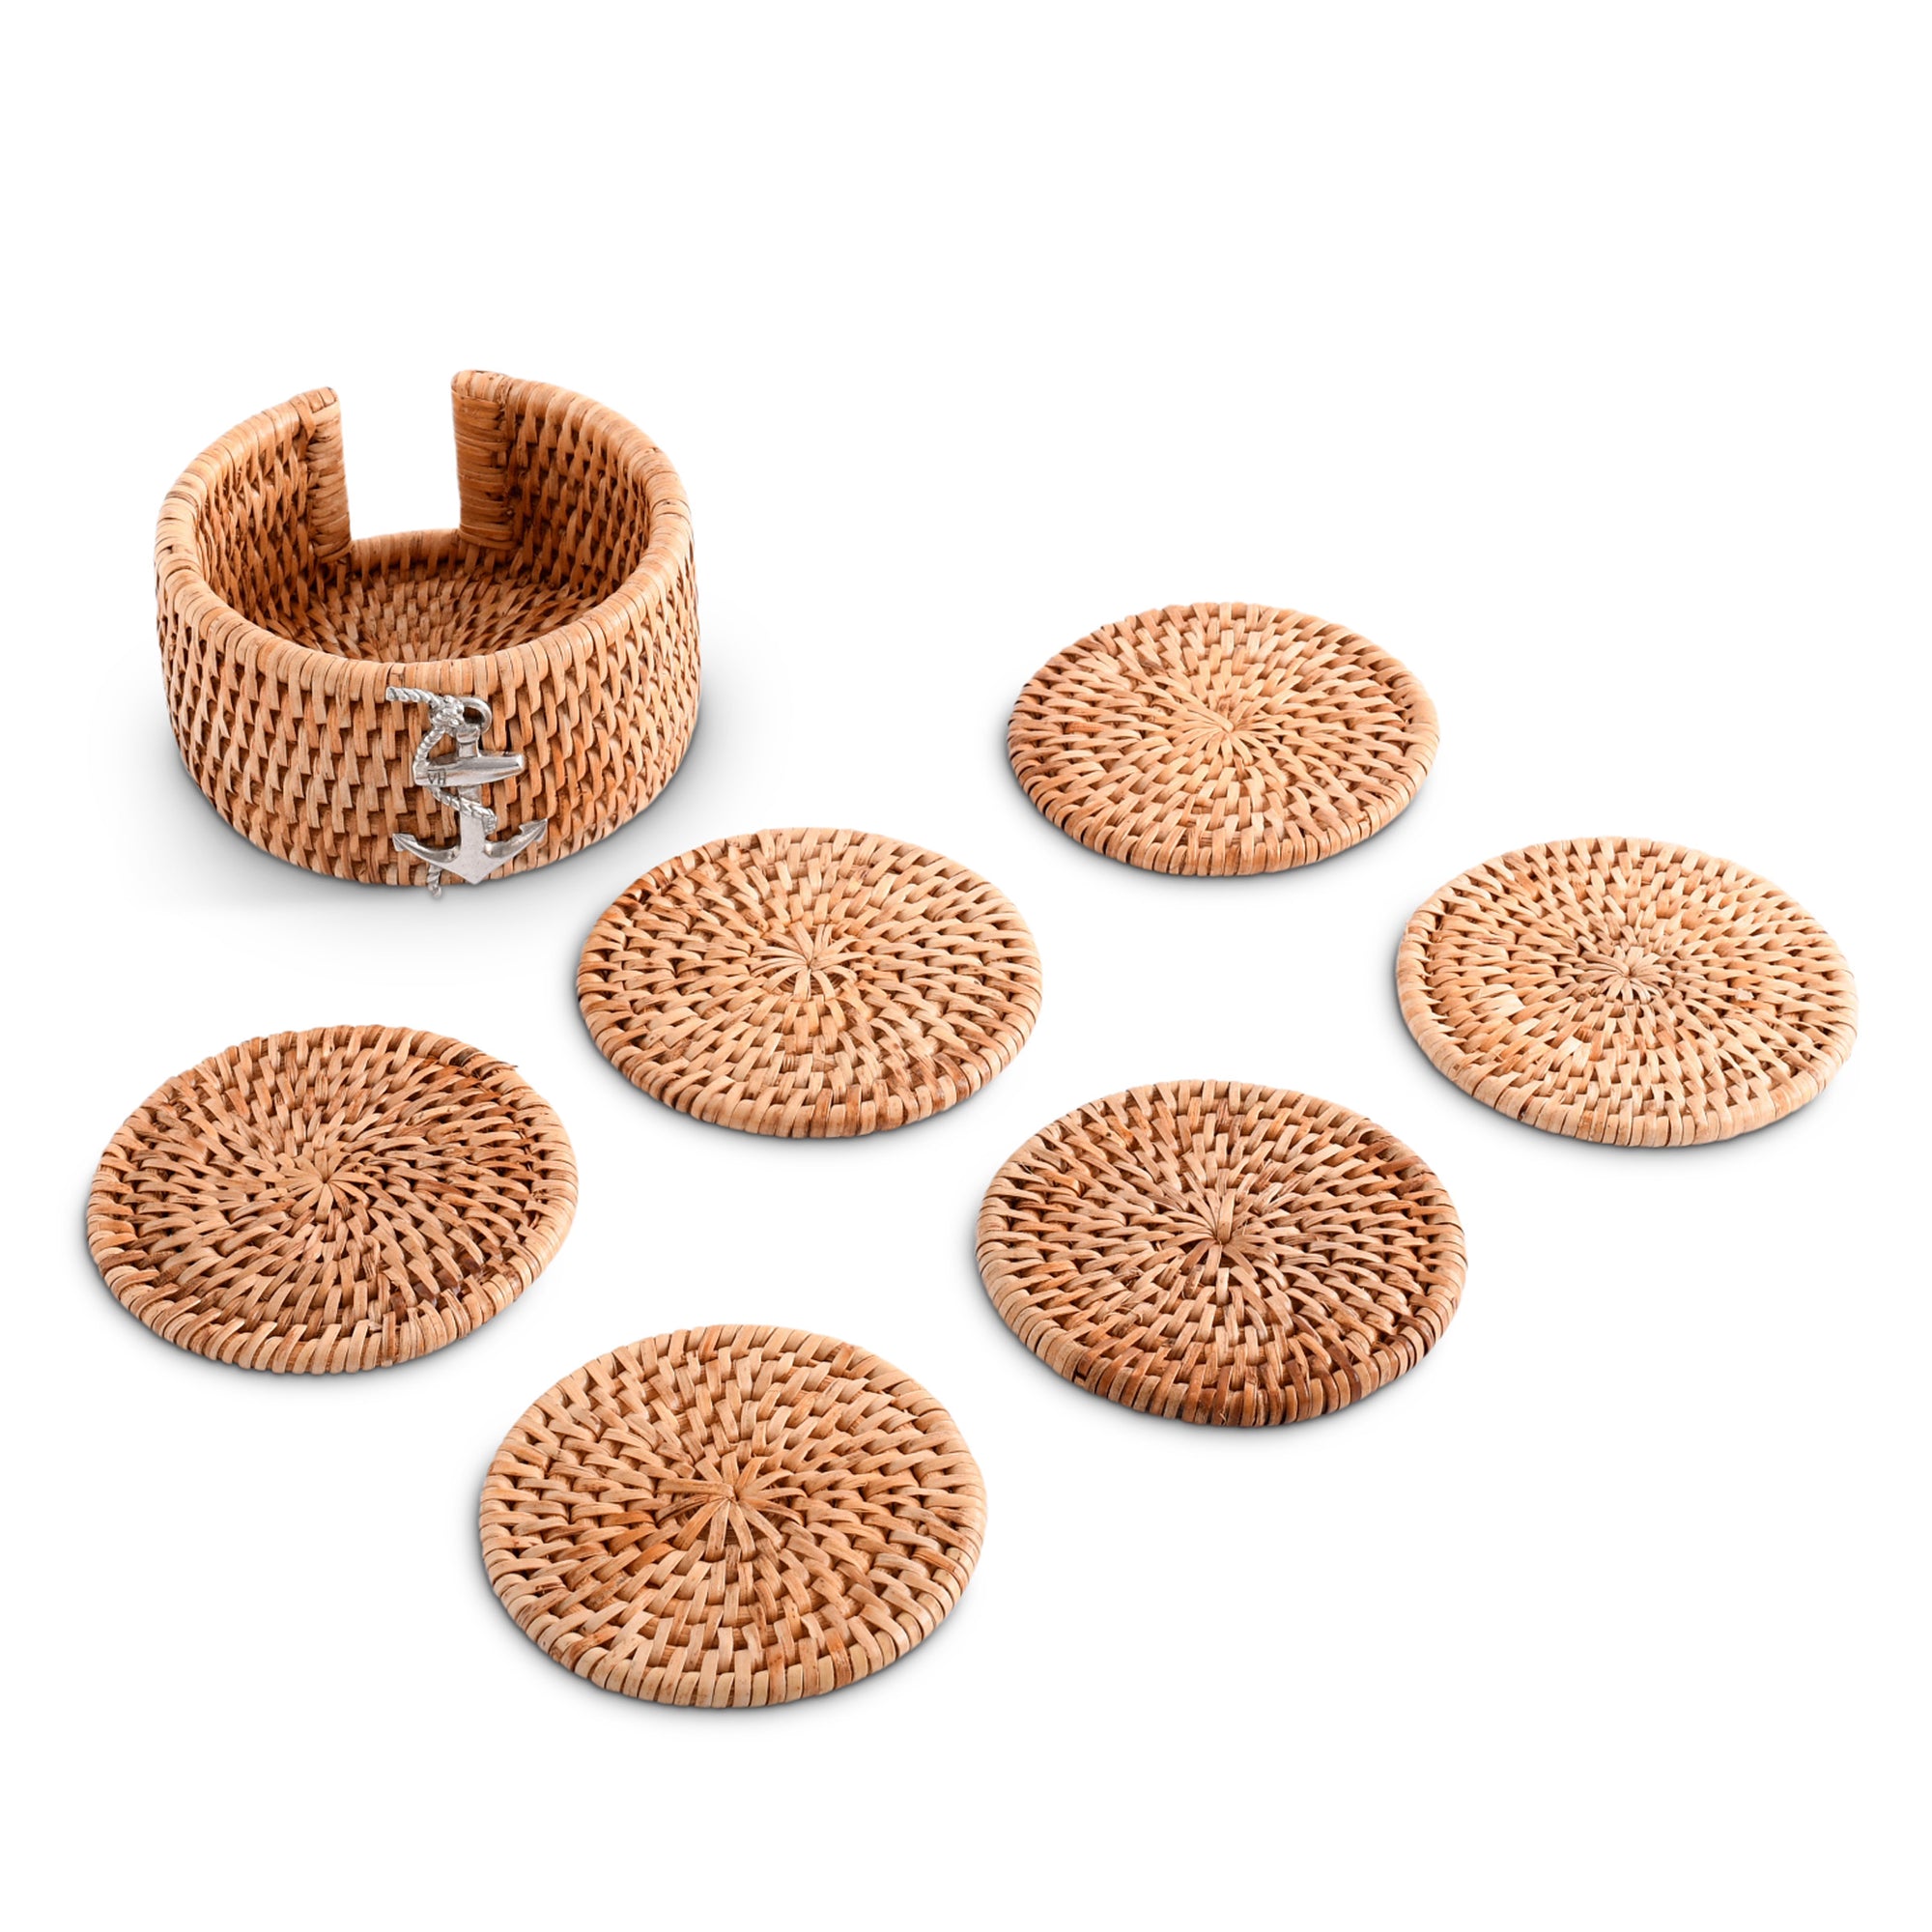 Vagabond House Anchor Hand Woven Wicker Rattan Coaster Set - 6 Coasters Product Image